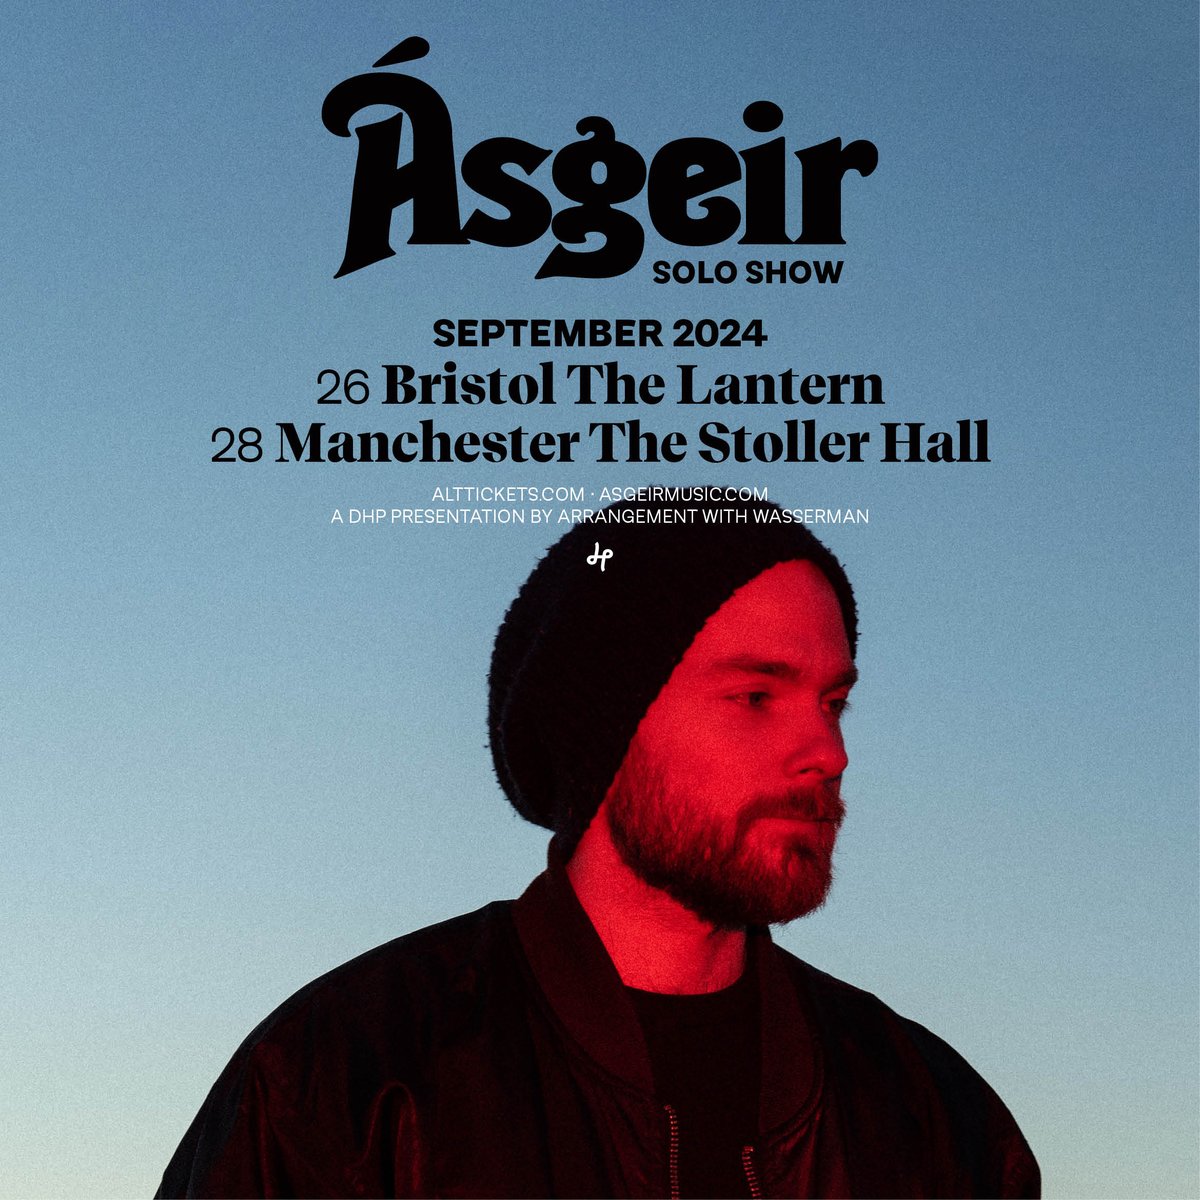 📢 New on sale 📢 @AsgeirMusic performs live at the Stoller Hall, Saturday 28 September! Find out more and get your tickets here: tinyurl.com/4997bcj6